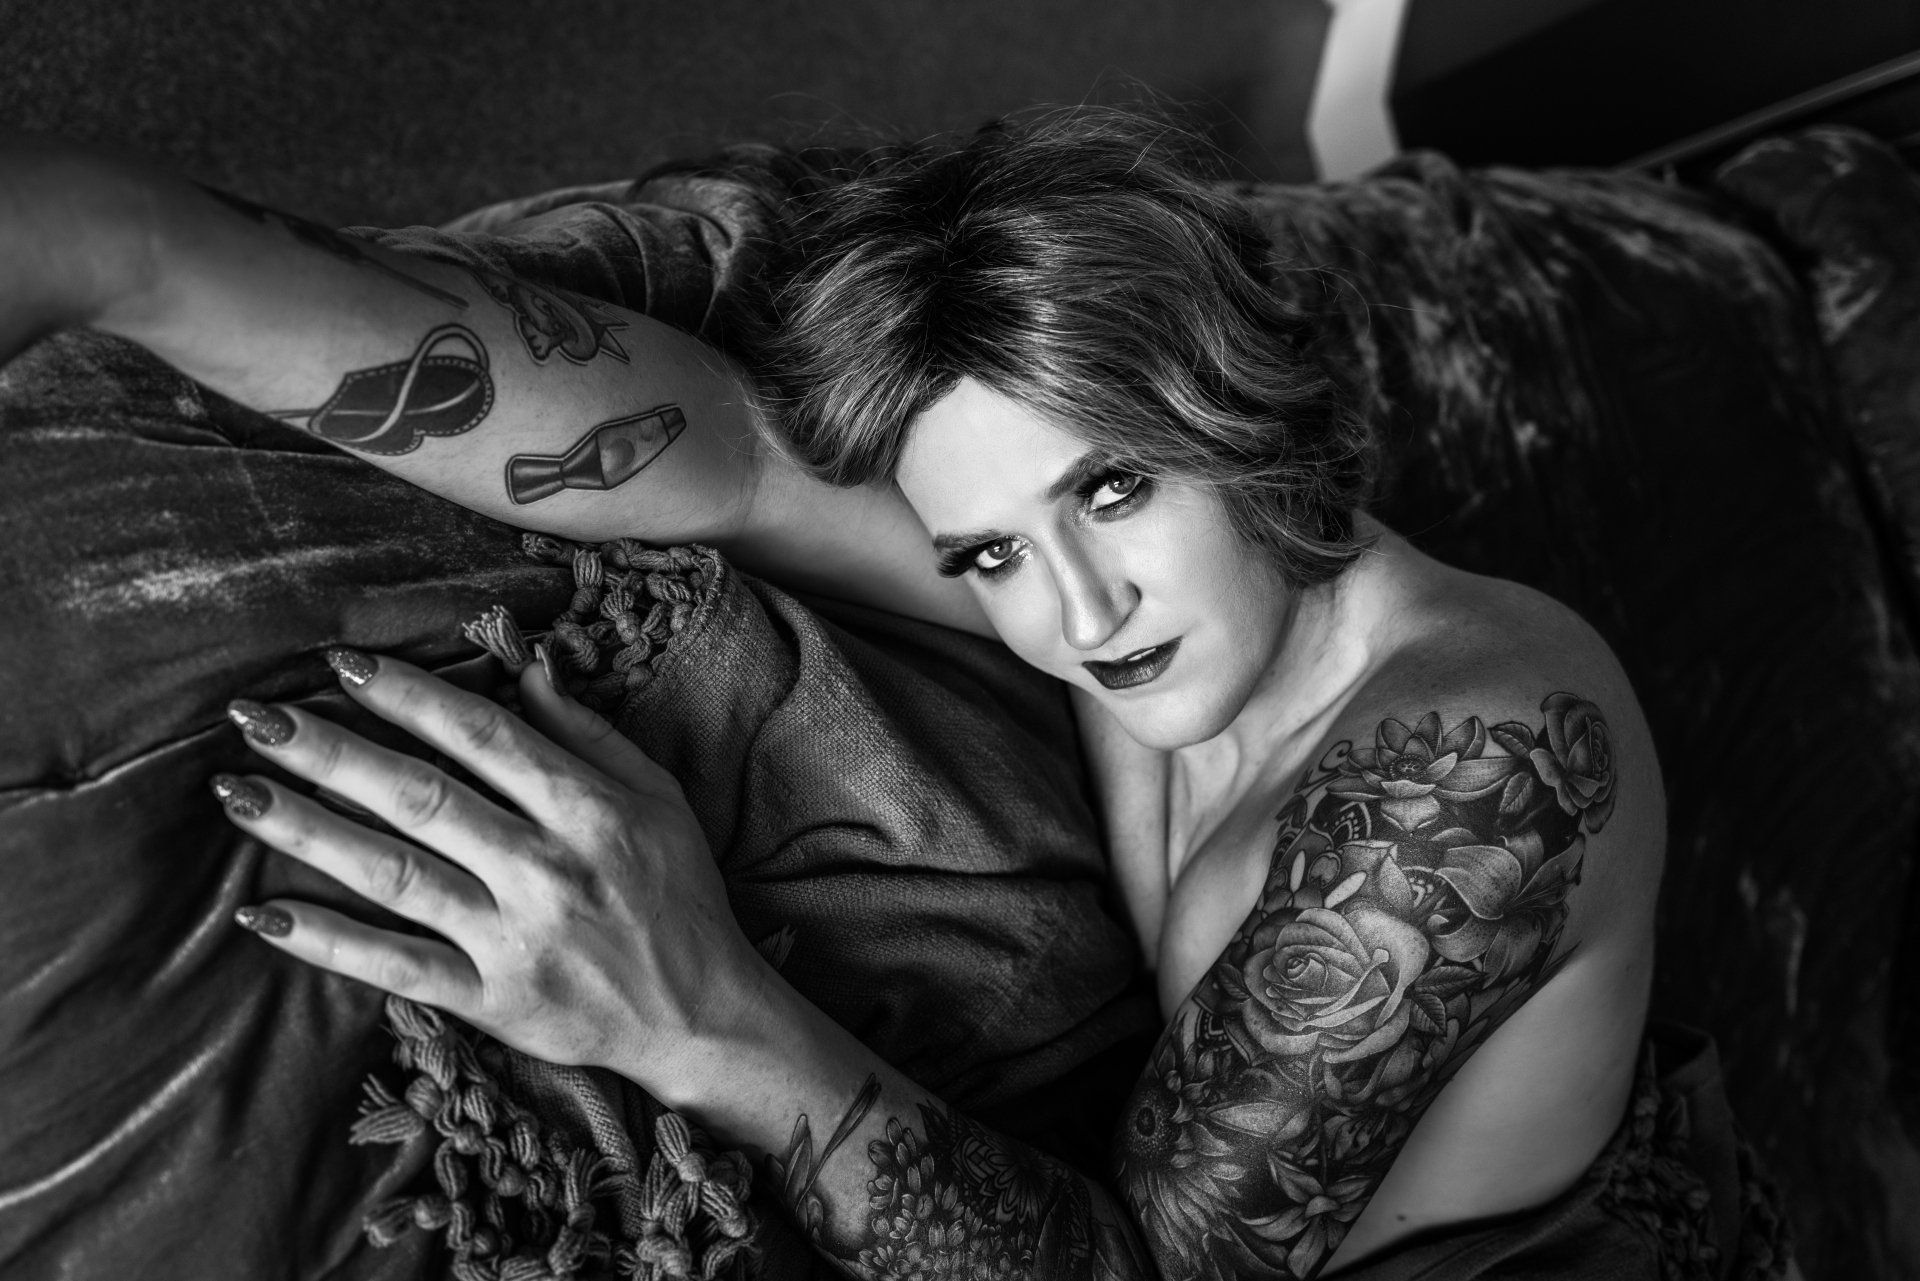 A tattooed woman lying on a bed.